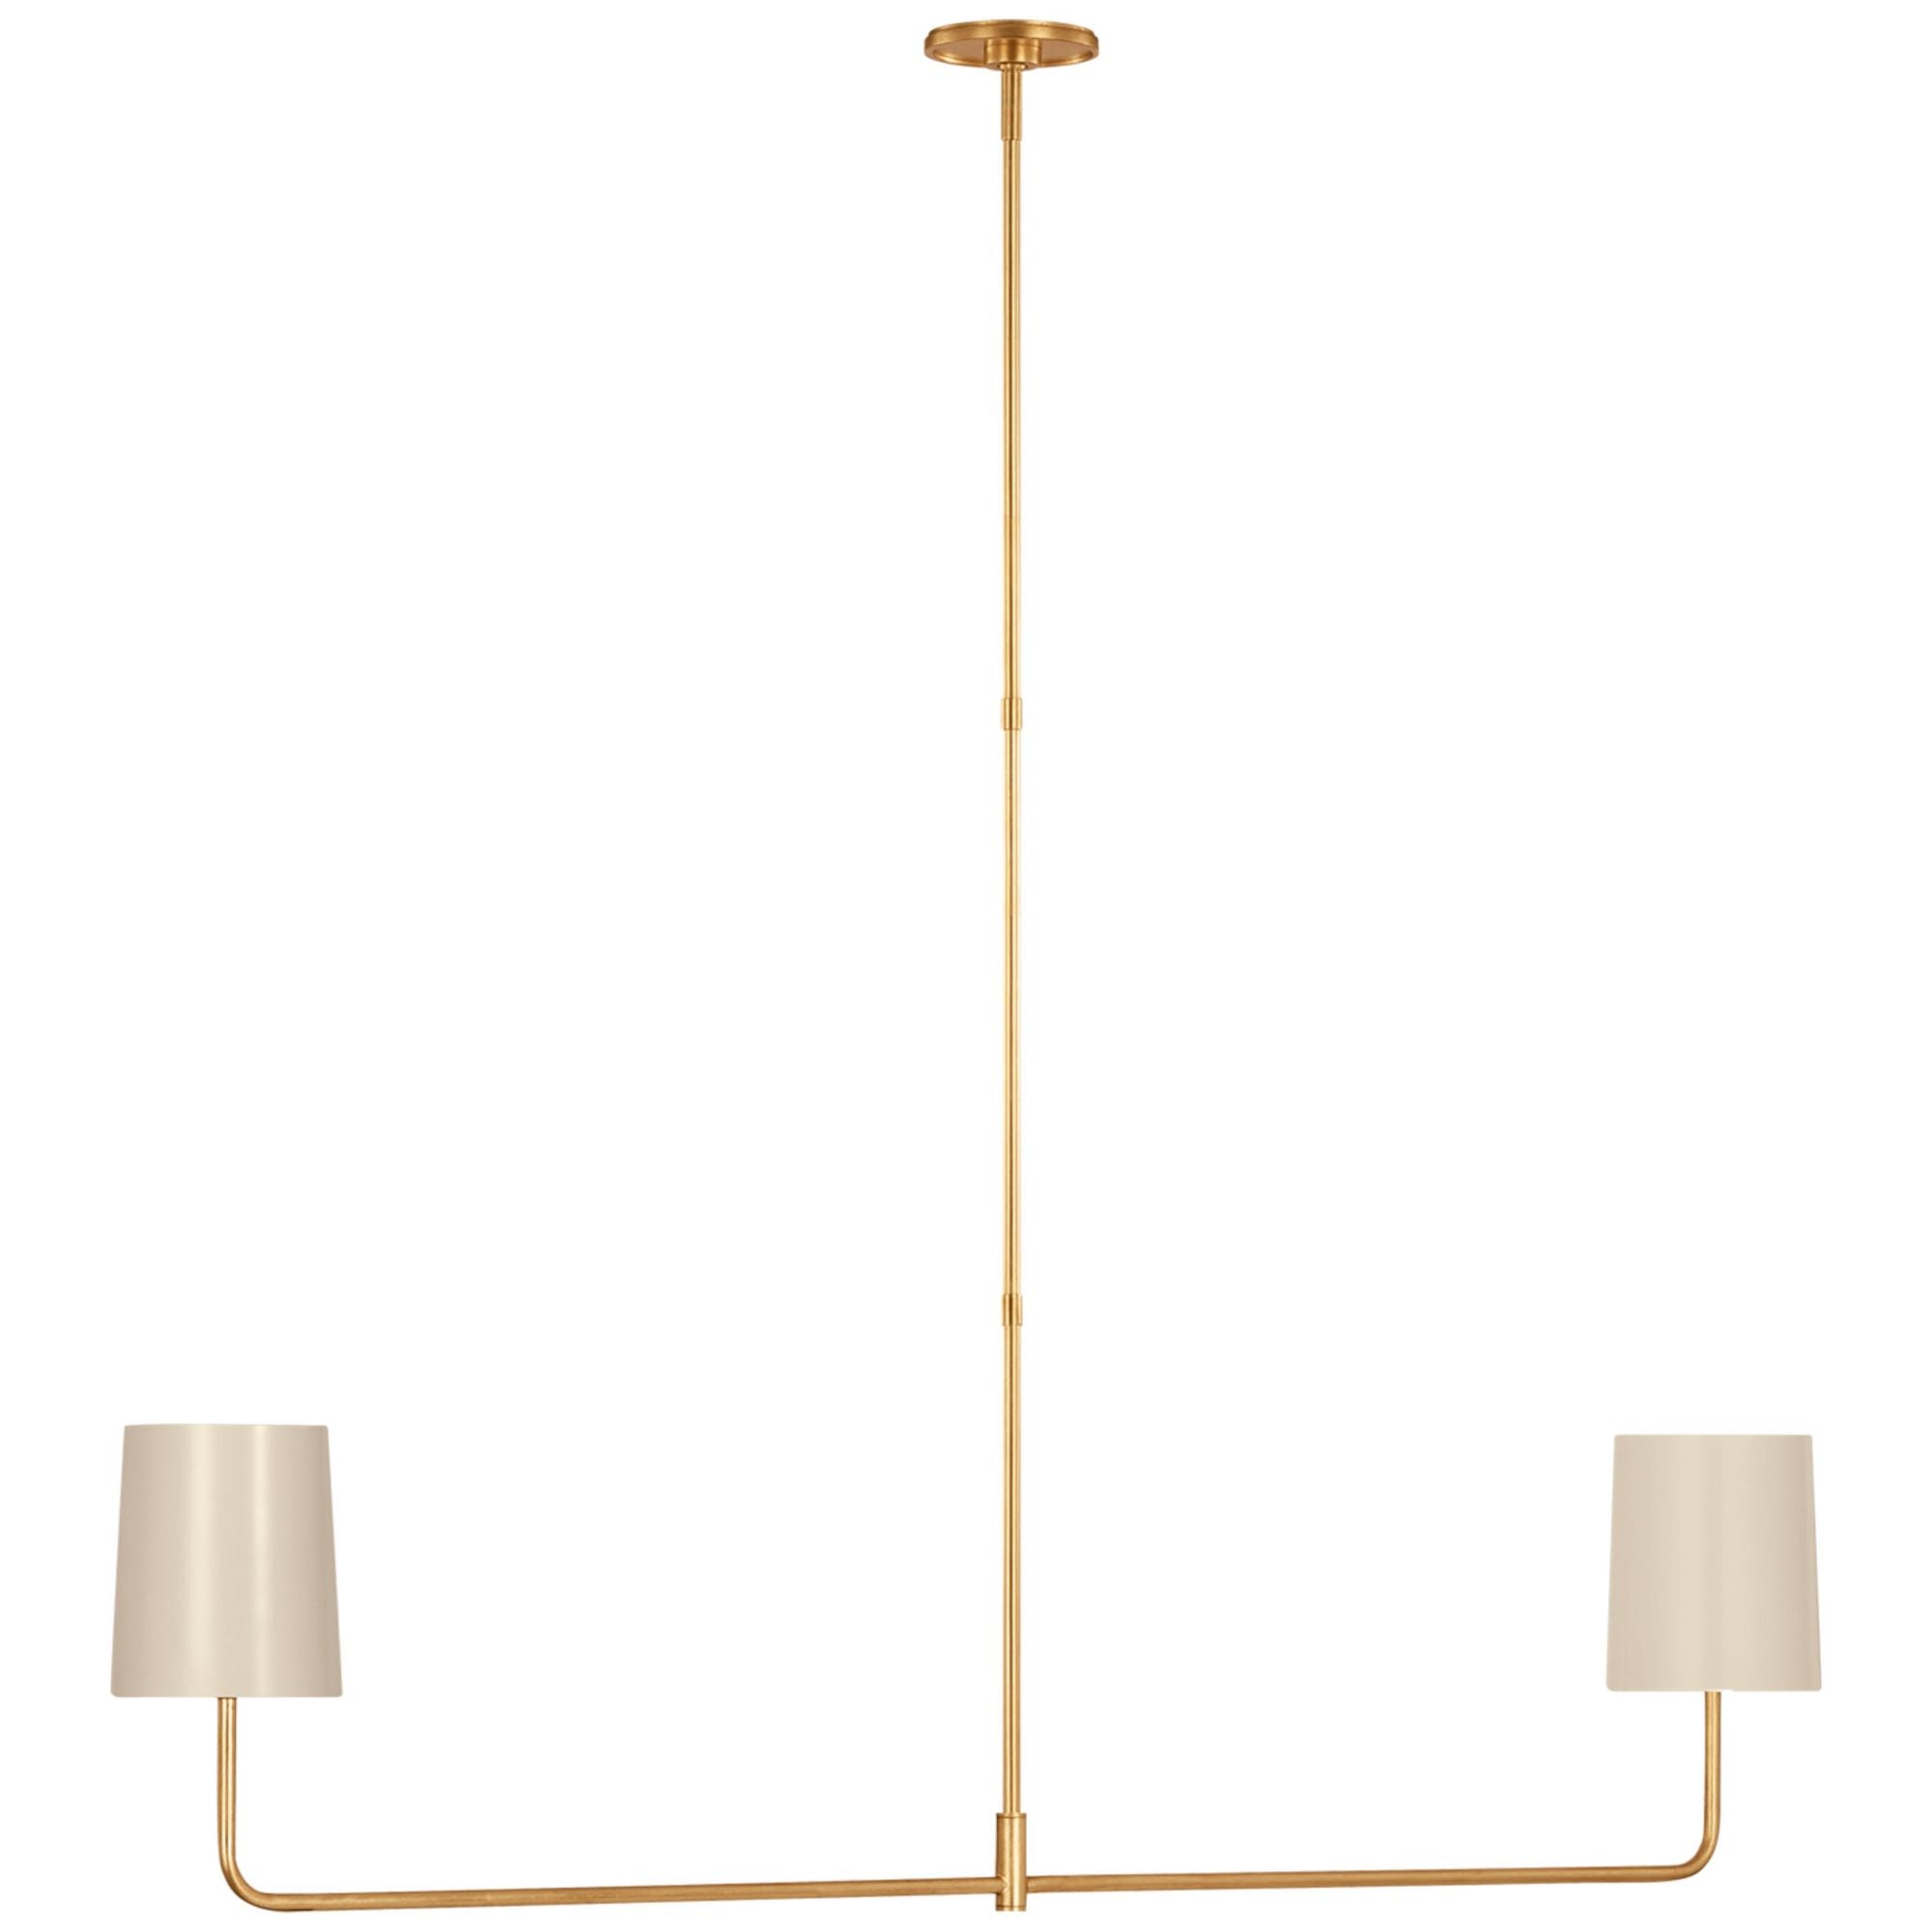 Barbara Barry Go Lightly 54" Two Light Linear Chandelier in Gild with China White Shades